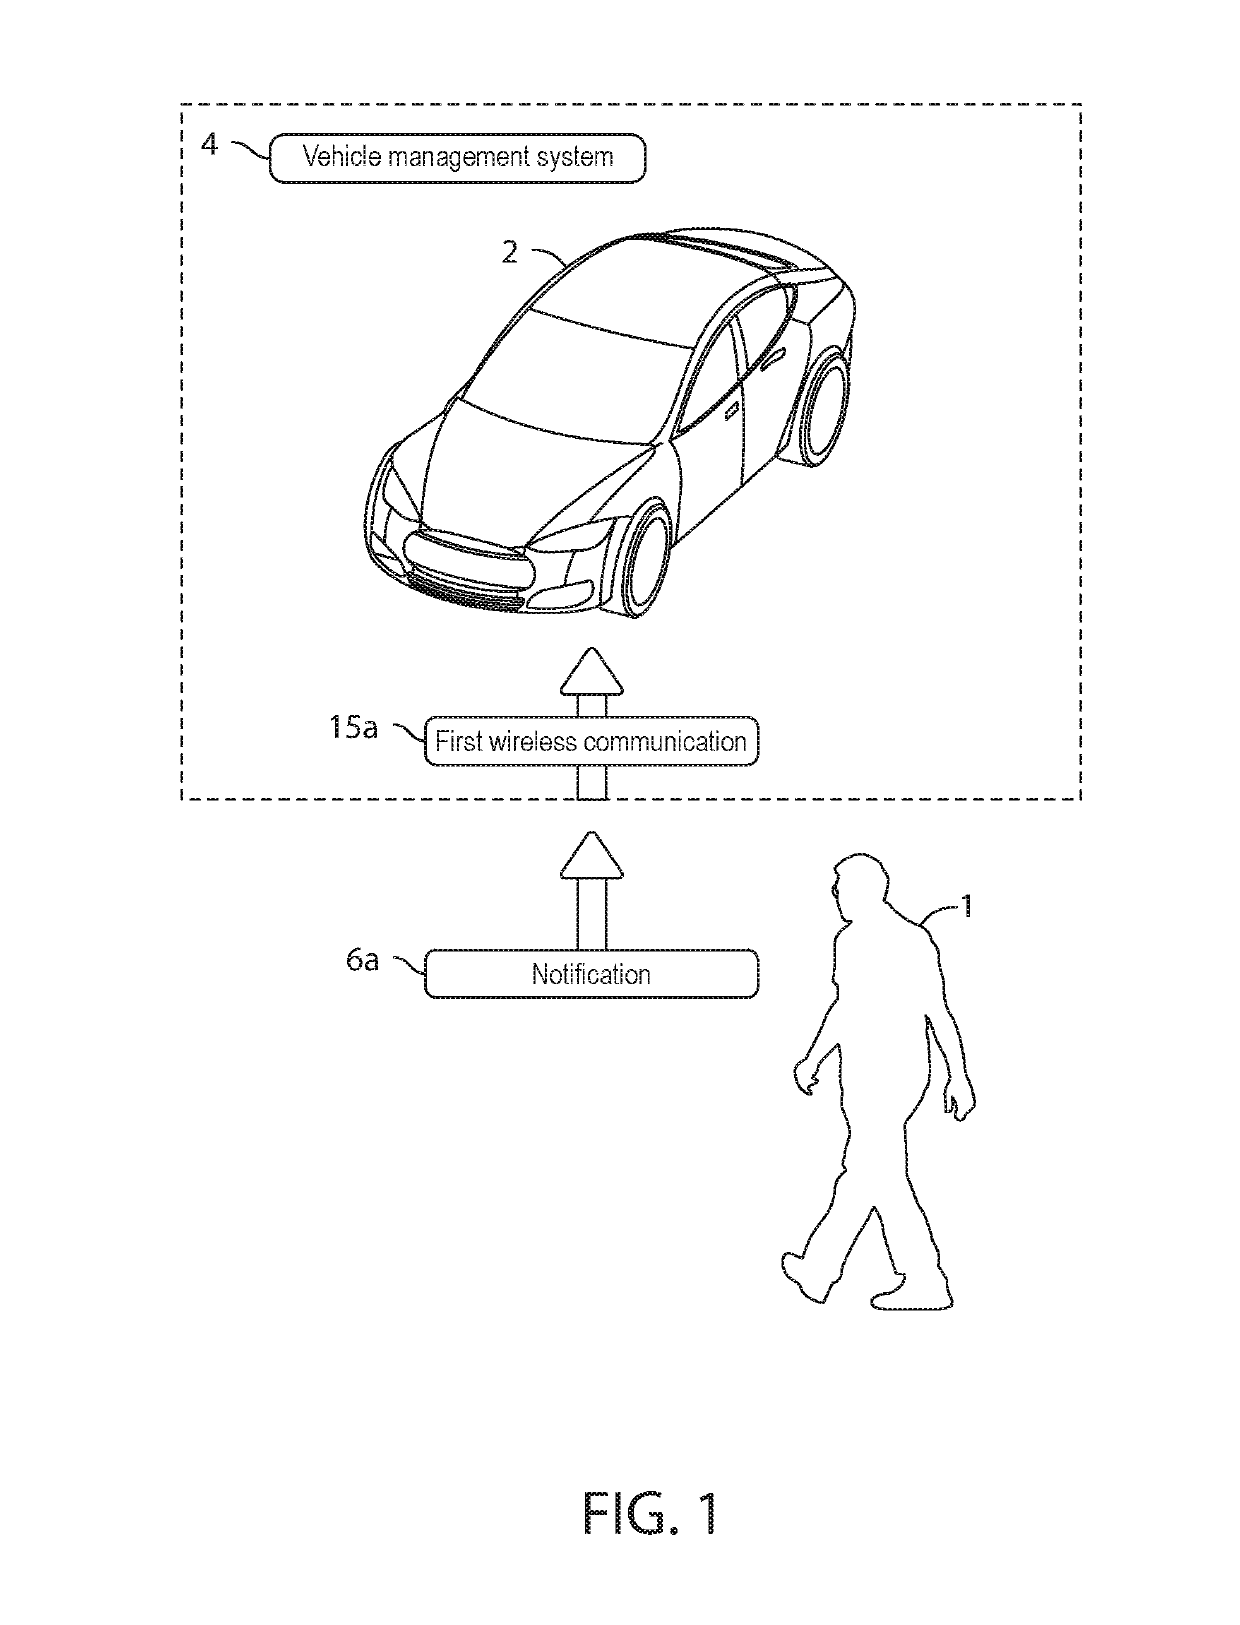 Self-driving vehicle actions in response to a low battery